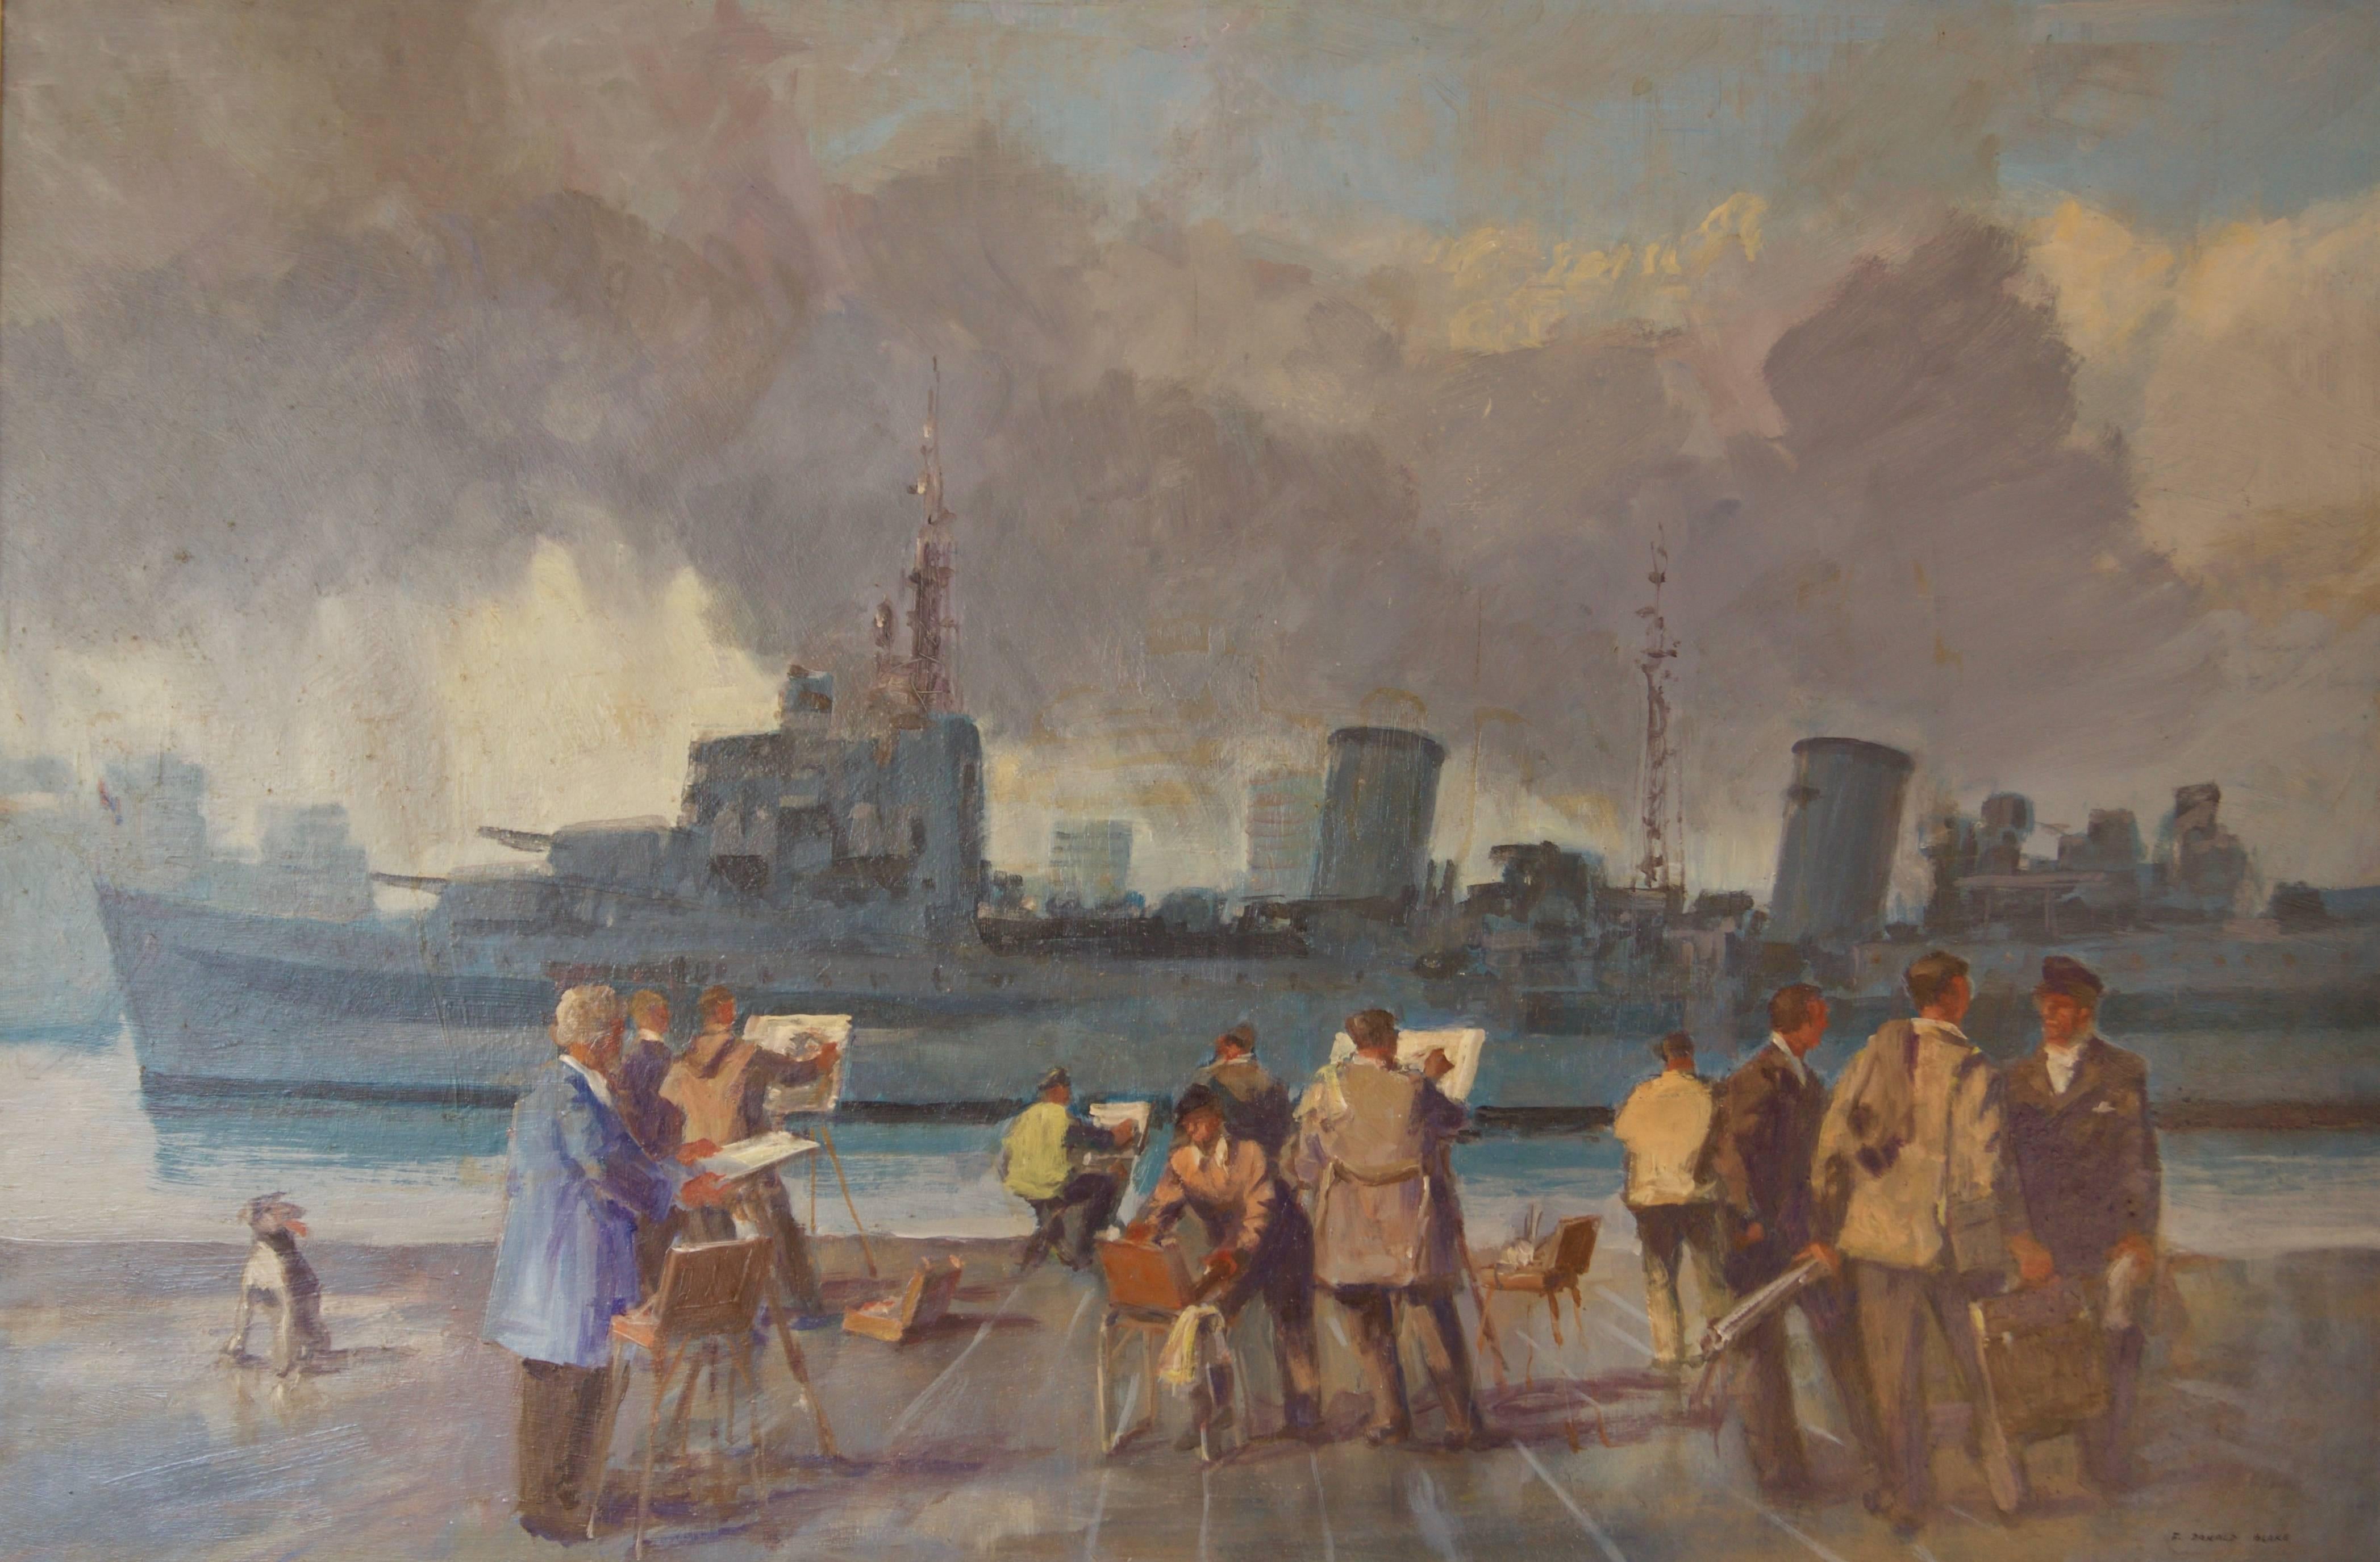 Frederick Donald Blake Figurative Photograph - Wapping Group of Artists by the Thames - Mid 20th Century Oil by Donald Blake